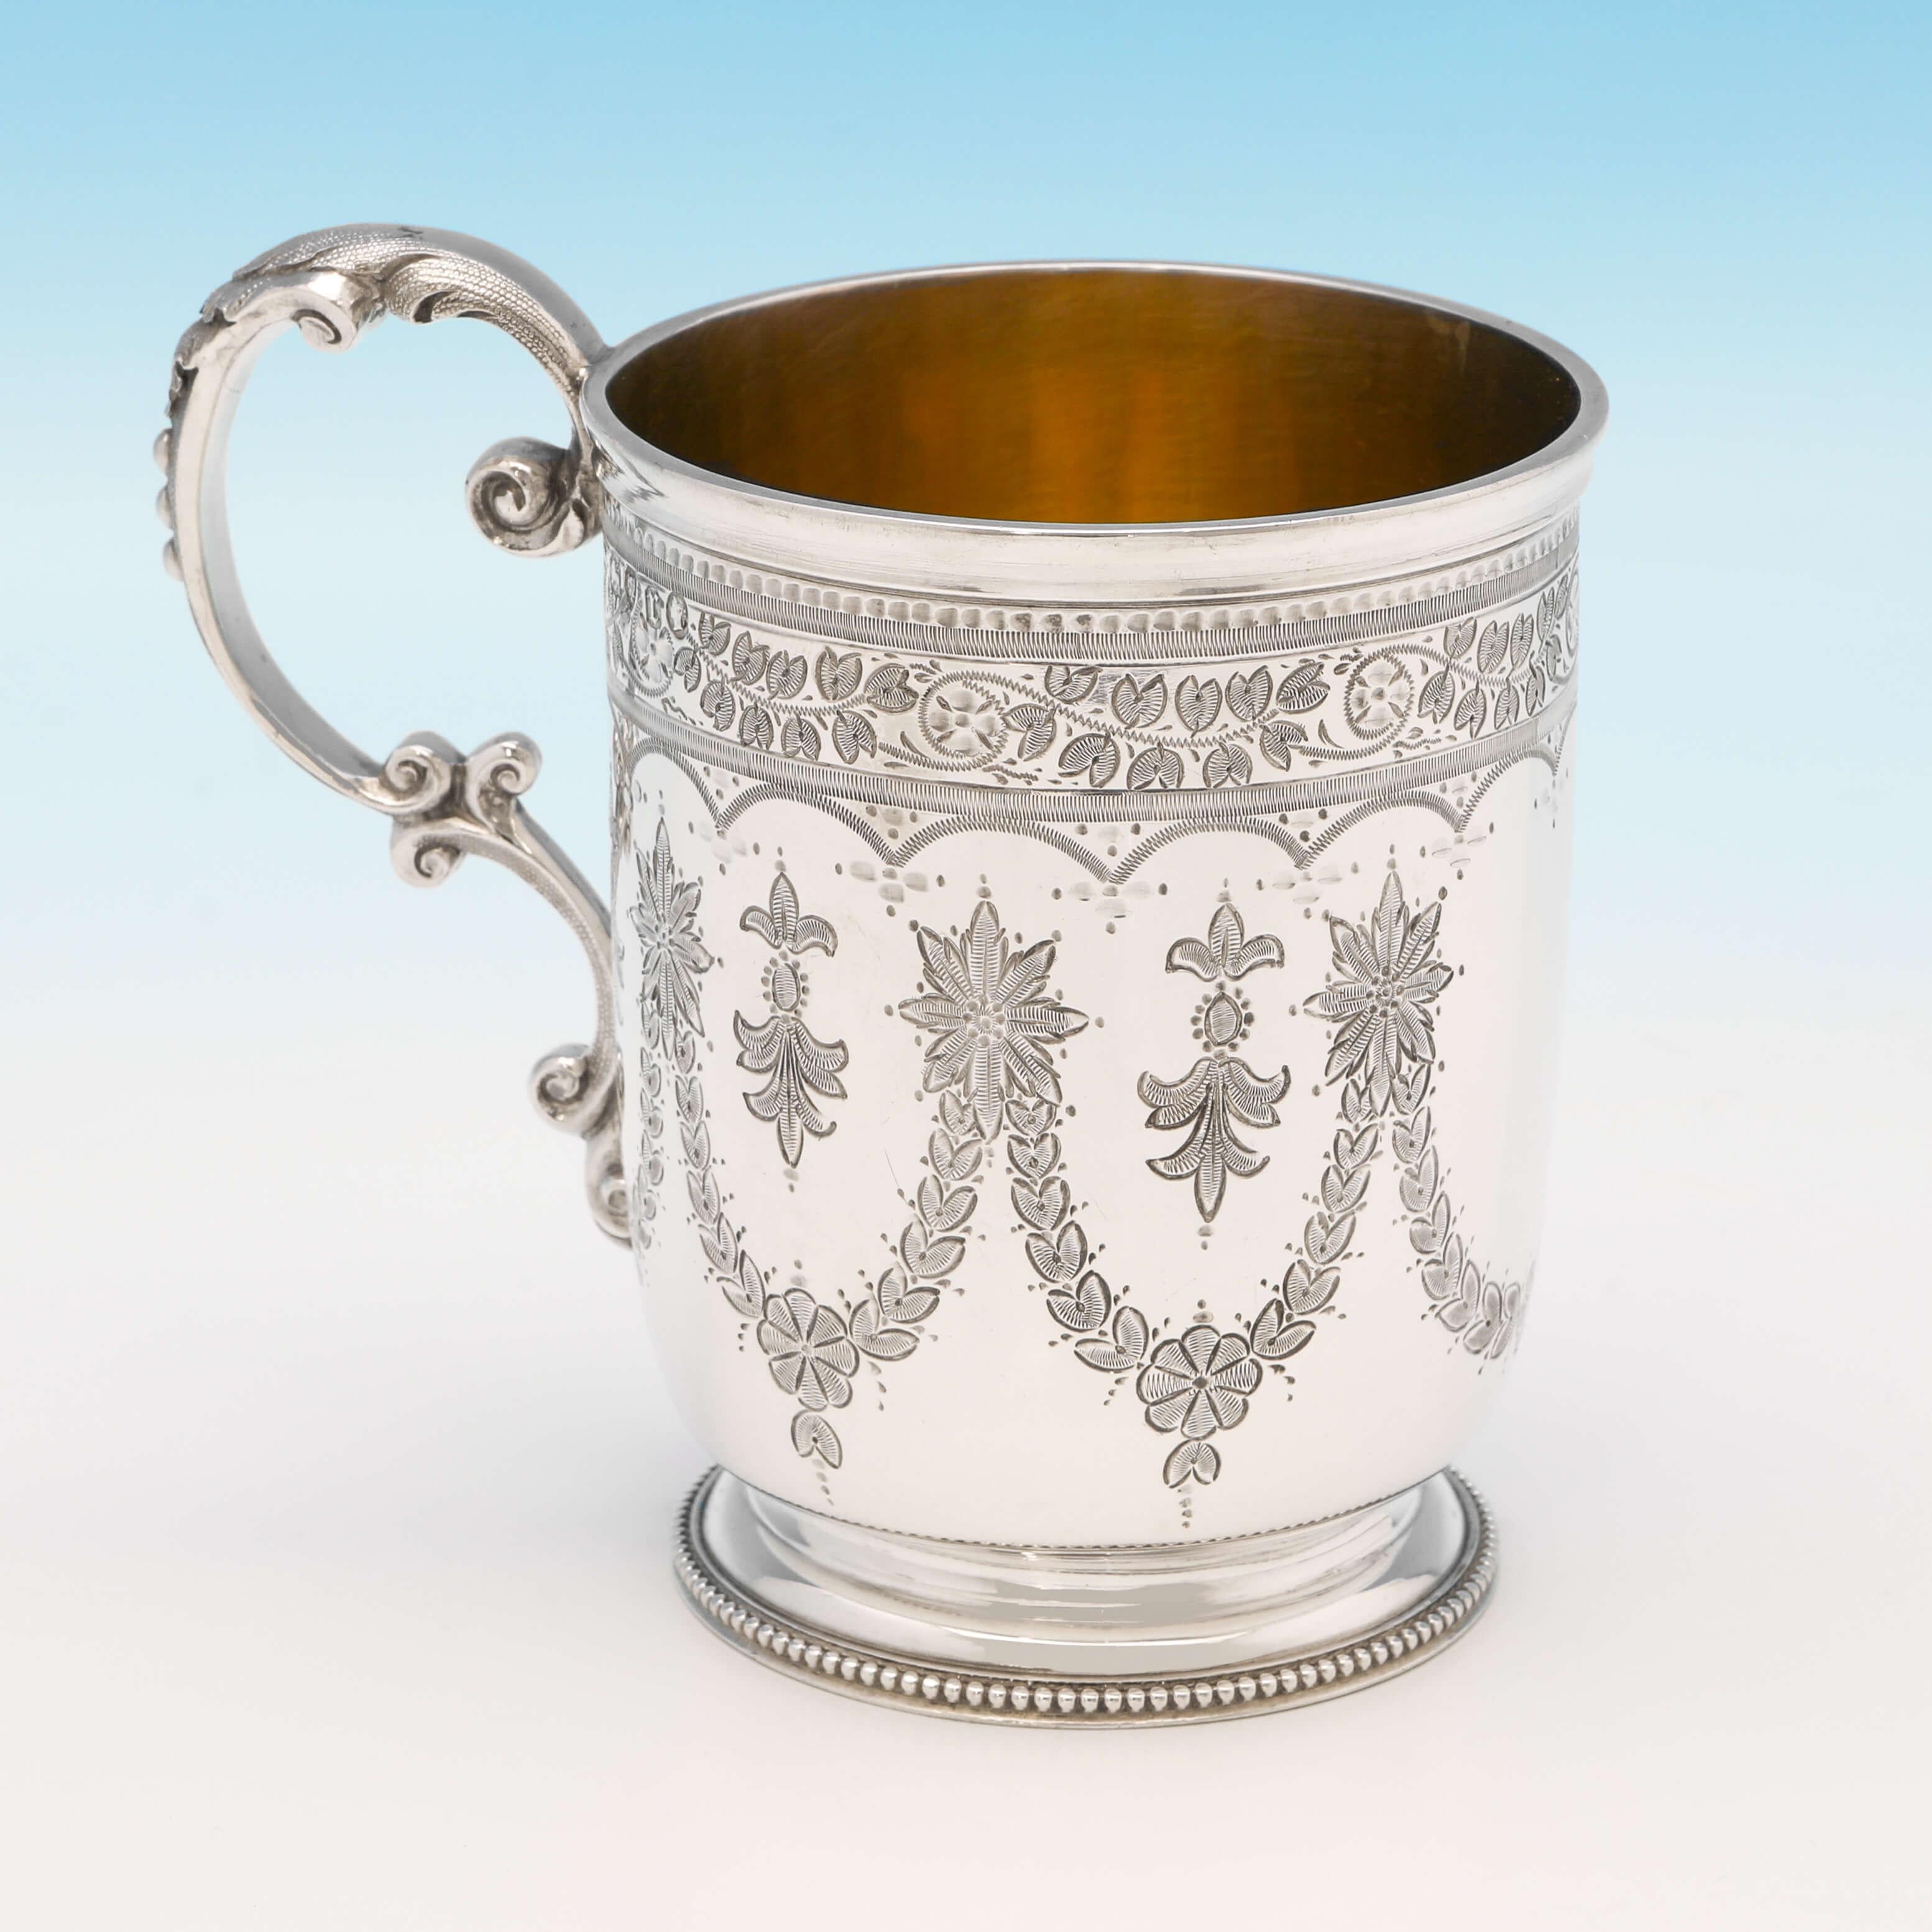 English Victorian Engraved Antique Sterling Silver Christening Mug from 1872